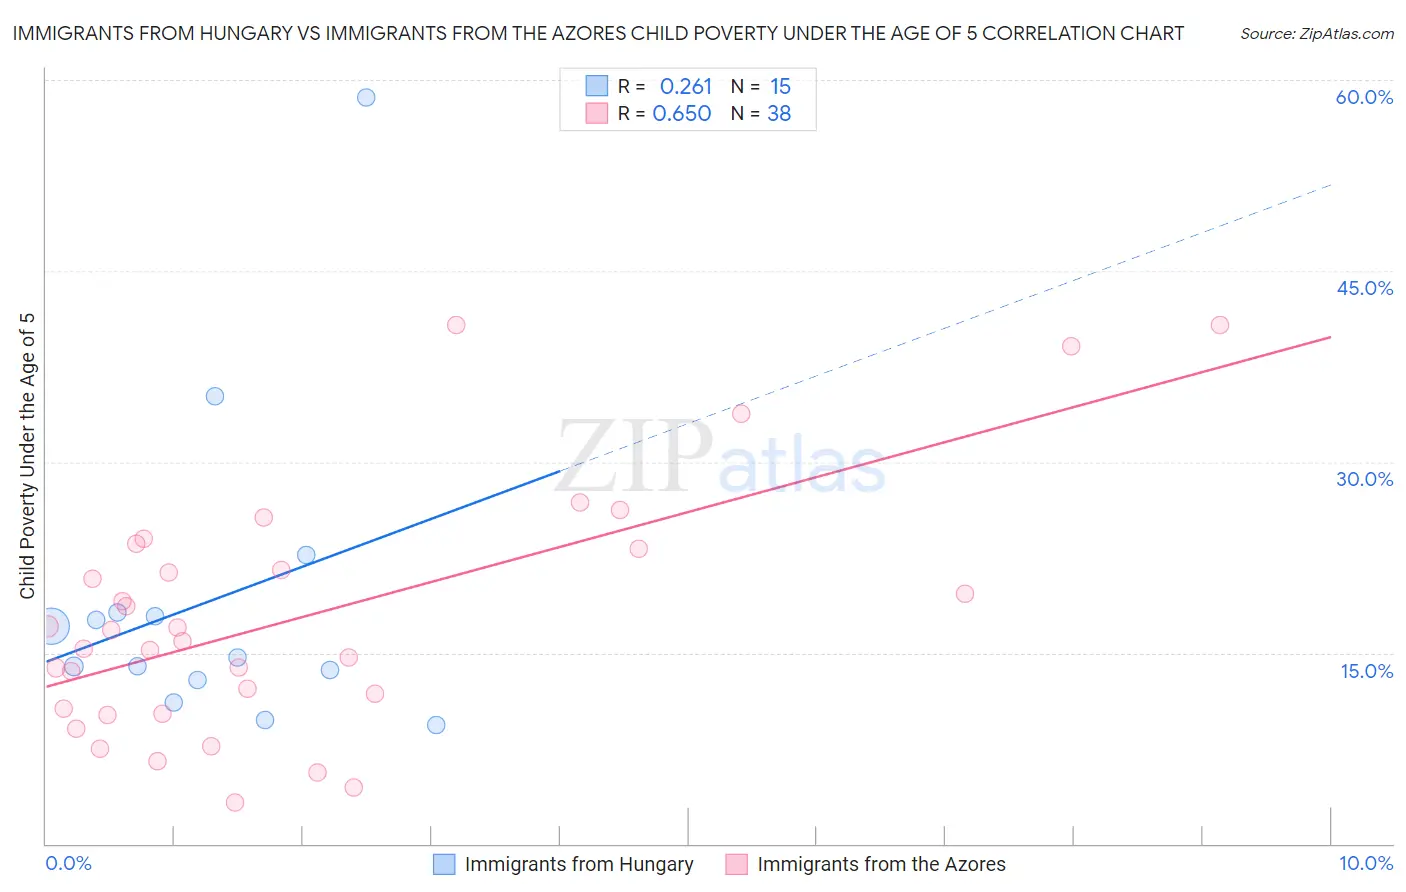 Immigrants from Hungary vs Immigrants from the Azores Child Poverty Under the Age of 5